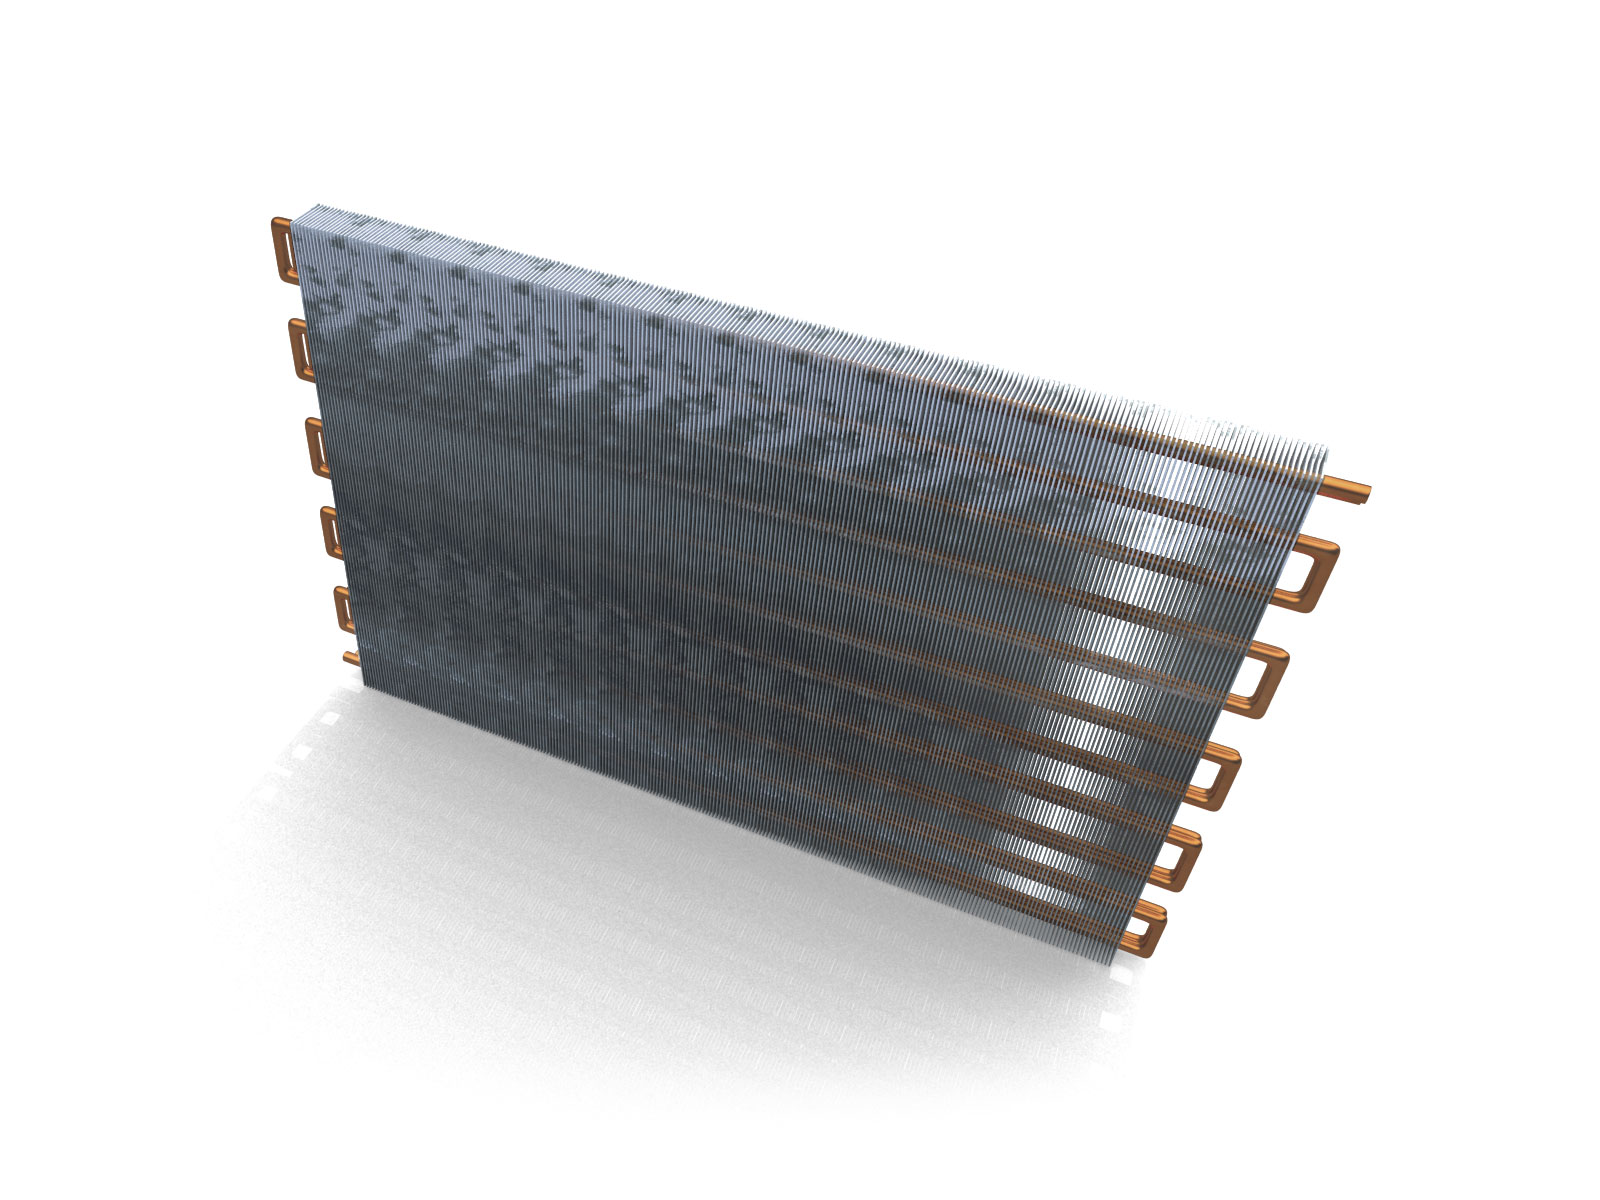 3D technical product model illustration of air conditioning coil top view